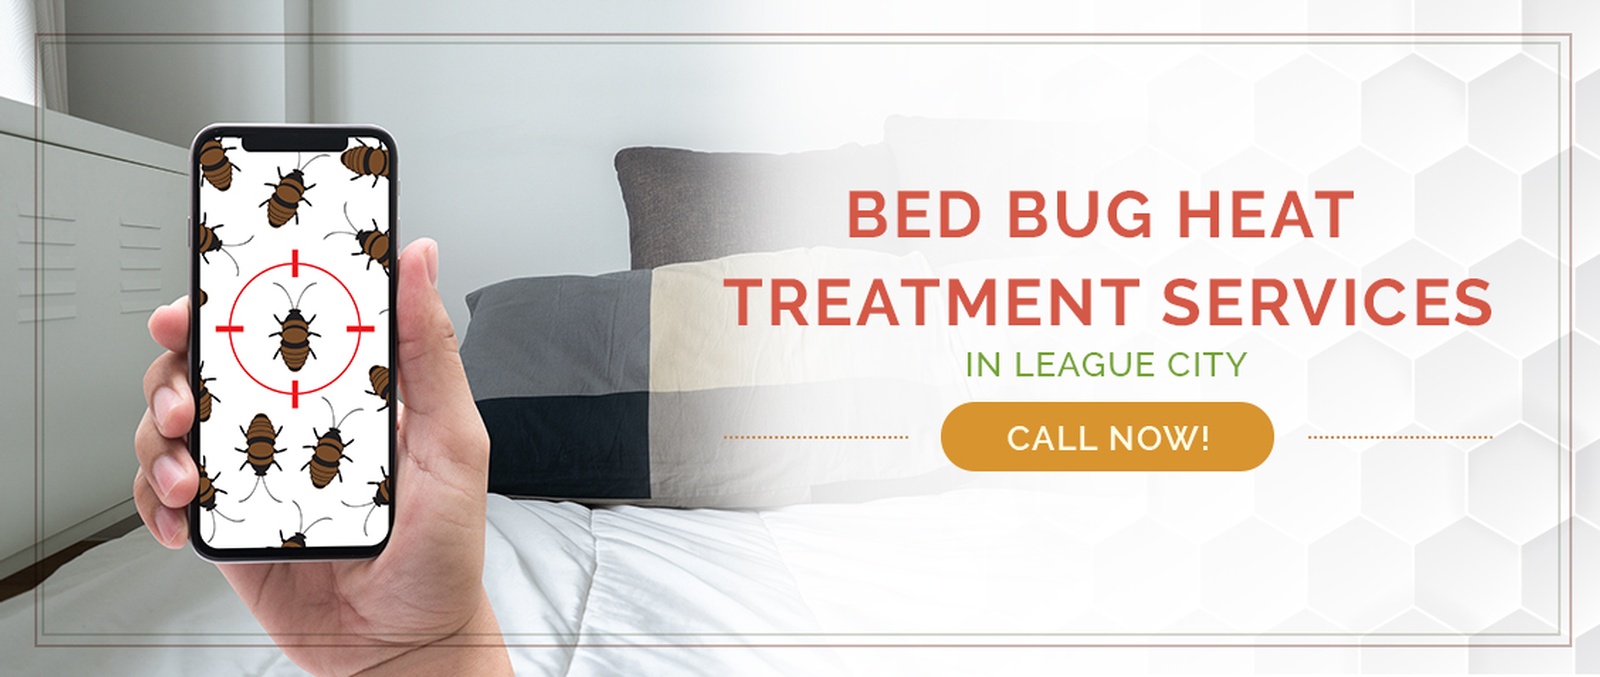 League City Bed Bug Treatment / Heater Rental Services by Houston Bed Bug Heaters